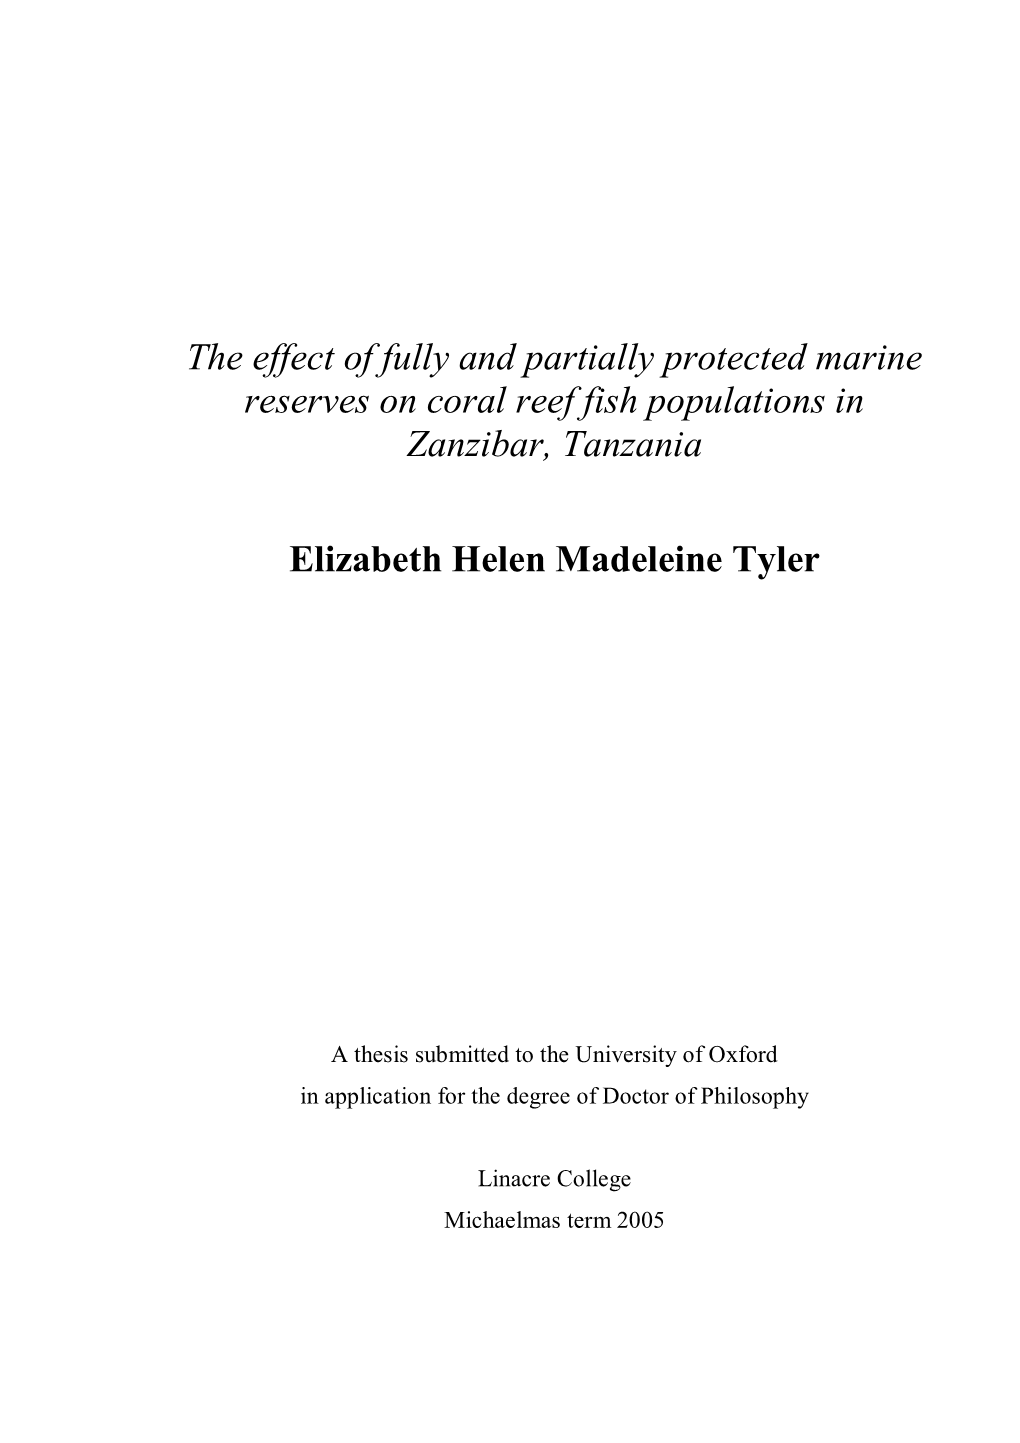 Tyler 2006 Effect of Marine Reserves Phd Thesis